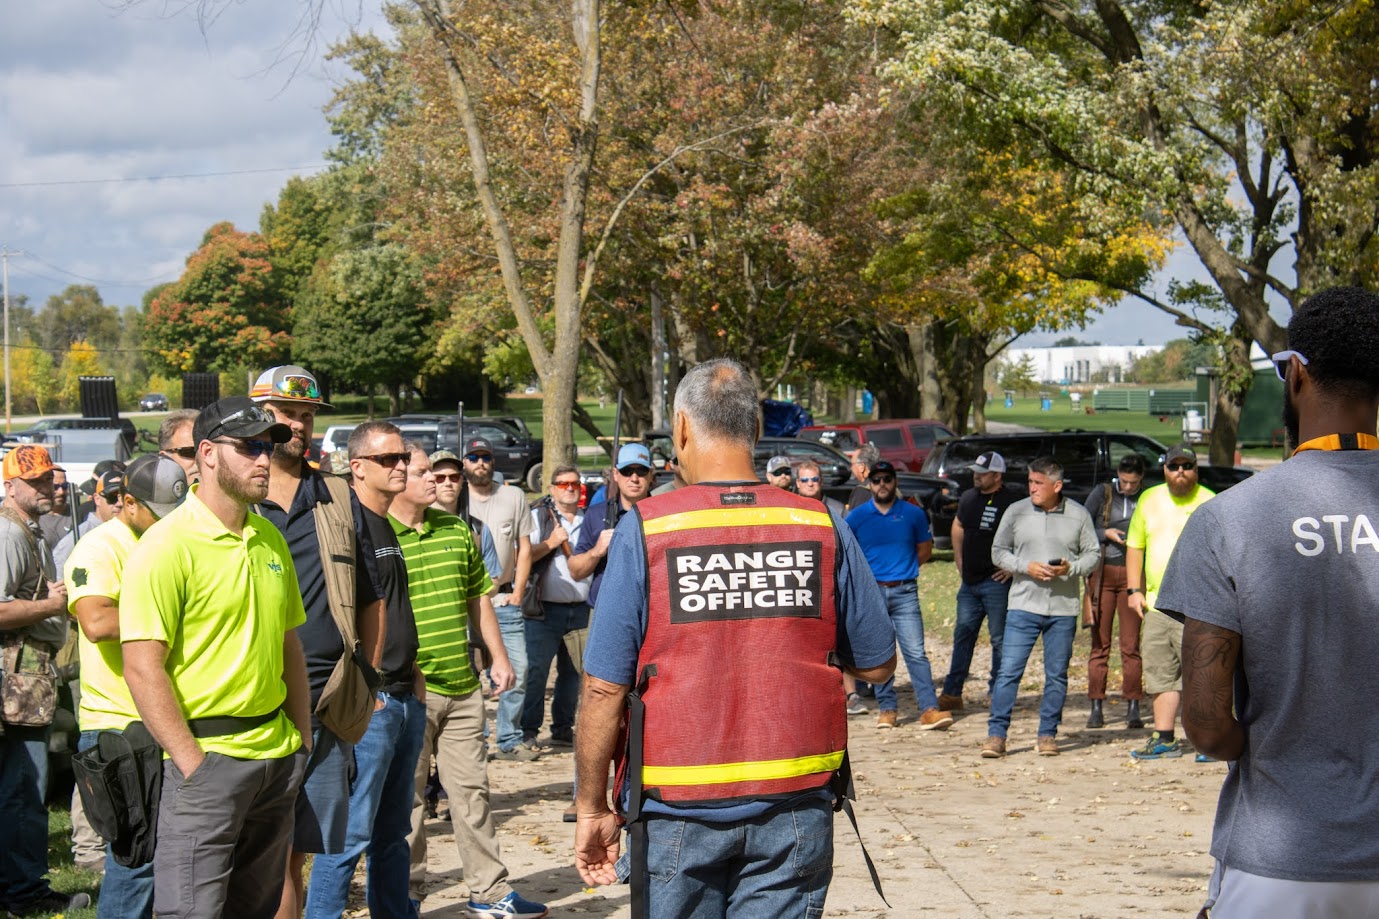 A diverse group of men, attentively listening to a range safety officer who is wearing a red vest labeled 'RANGE SAFETY OFFICER'. The setting is an outdoor park with scattered trees and greenery, under a partially cloudy sky. Some attendees are in casual attire, while others wear uniforms or safety gear